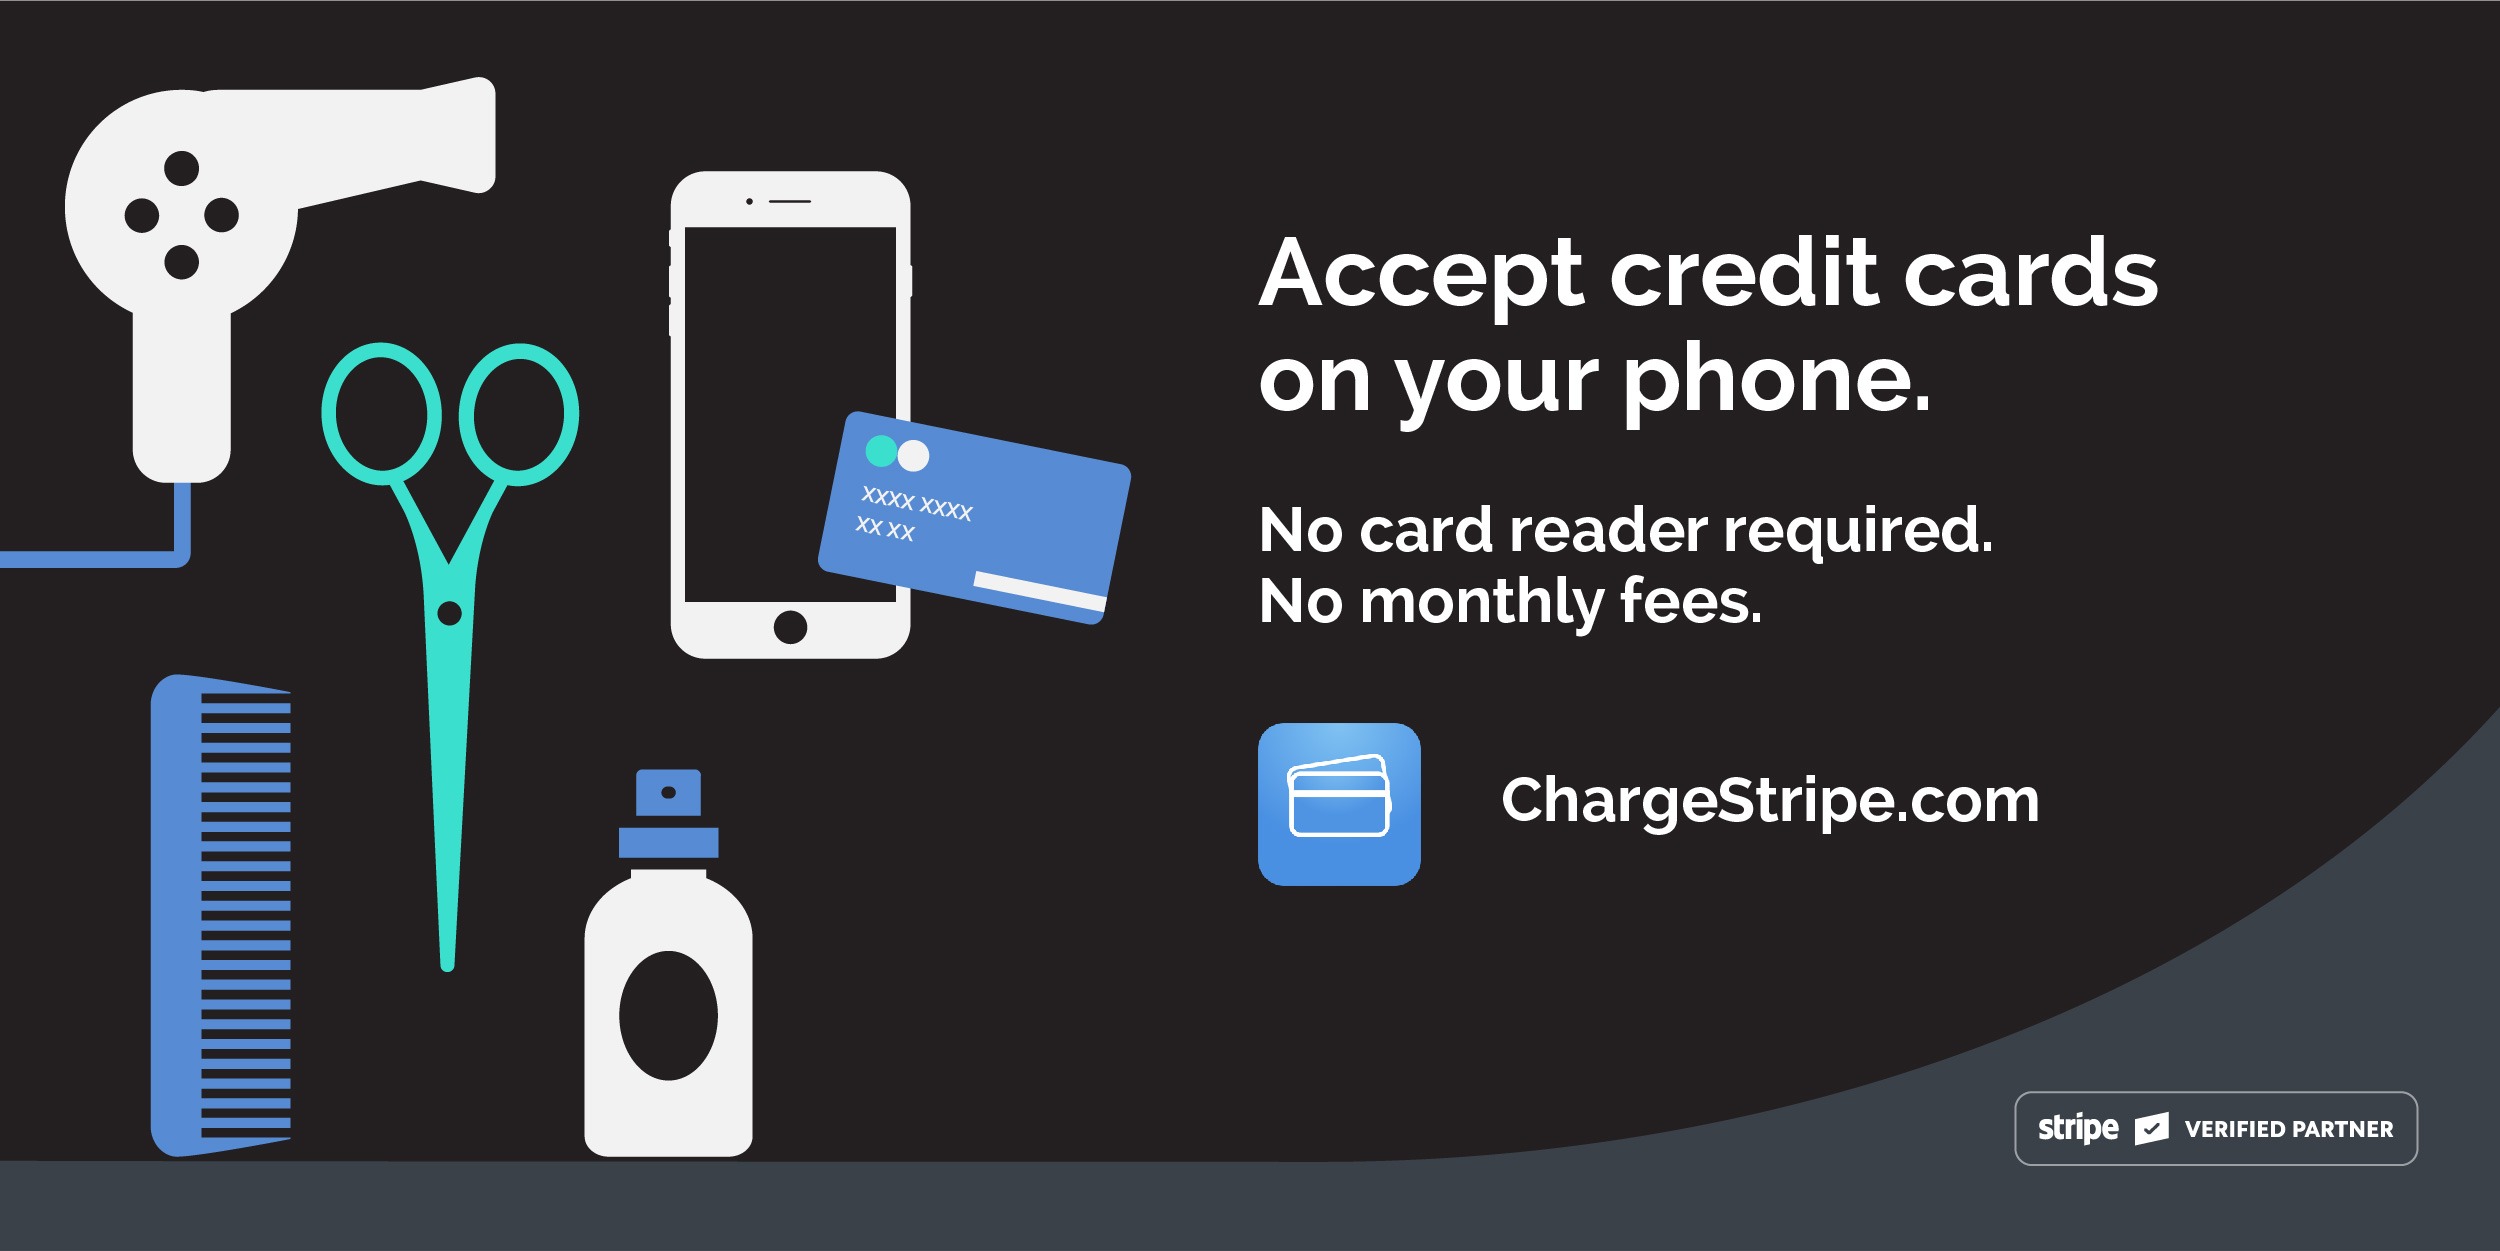 ChargeStripe is a must have app for hairstylists